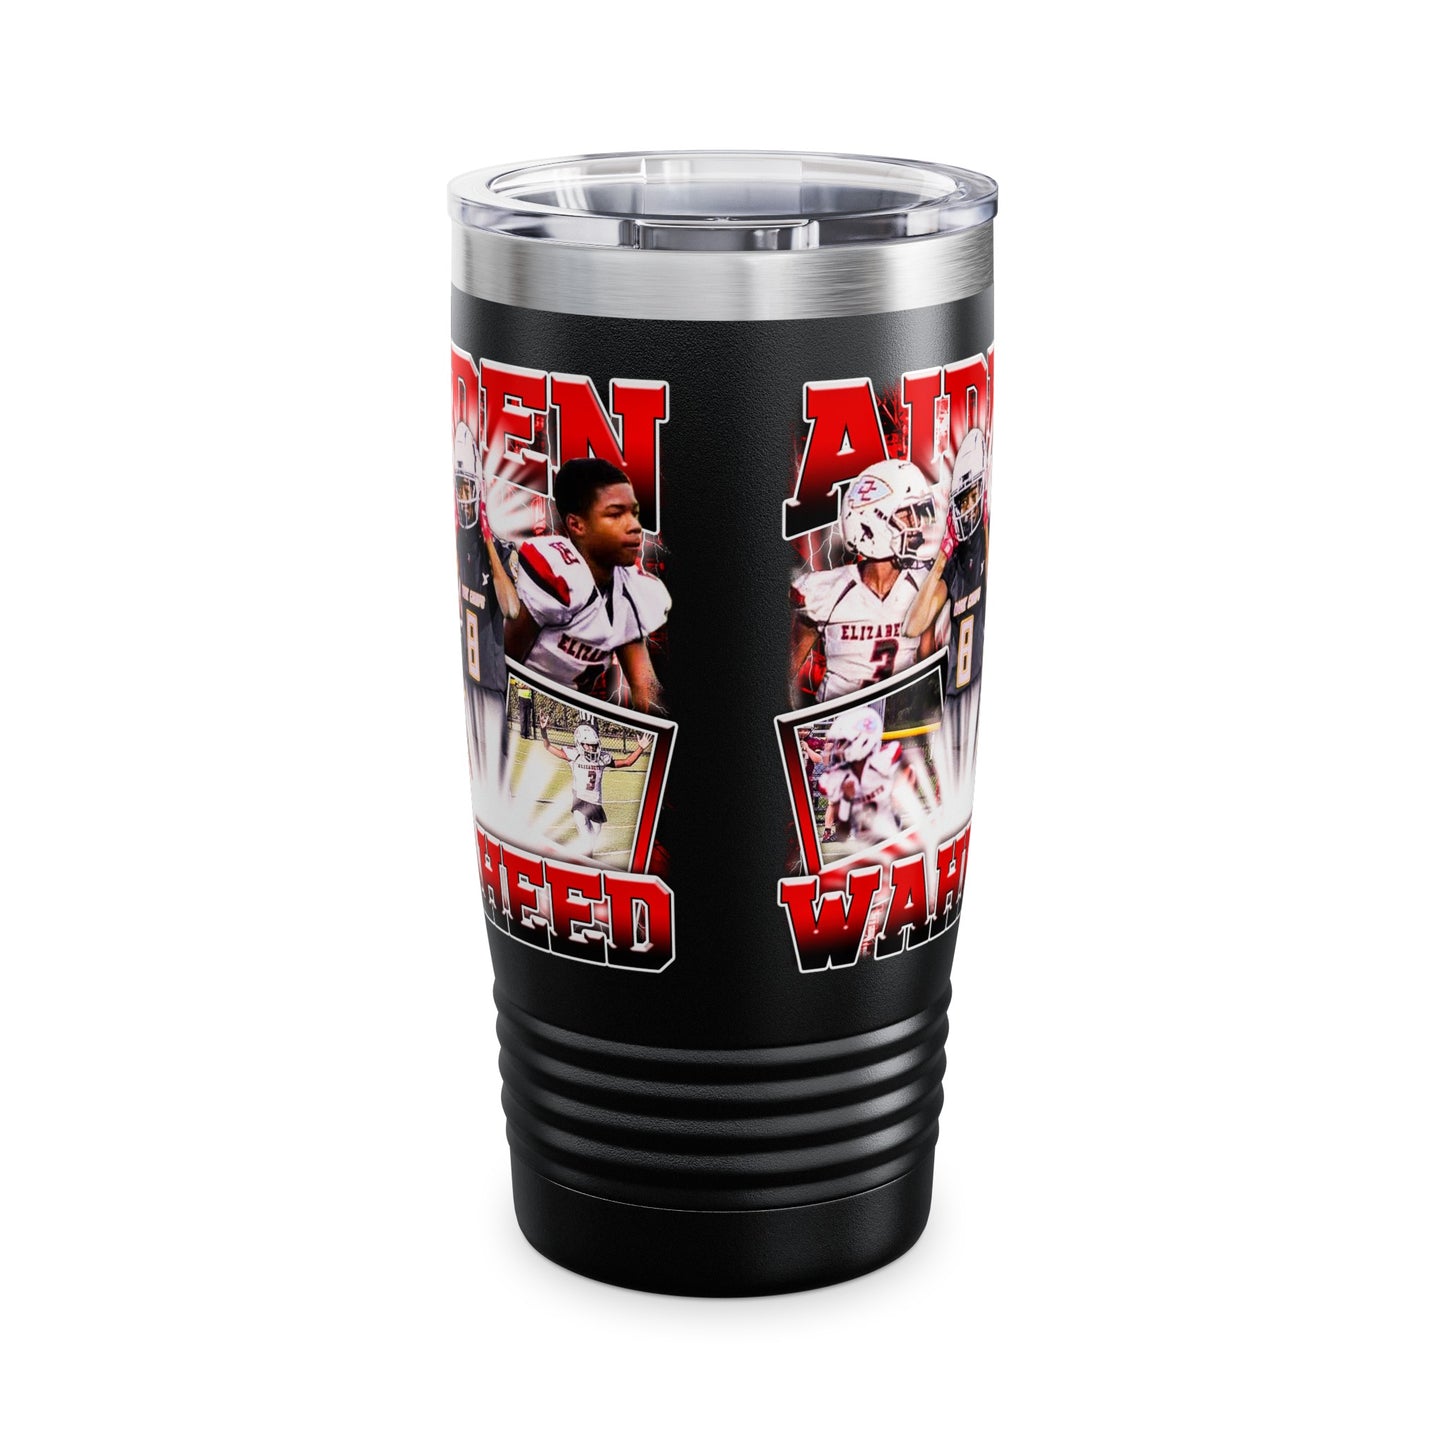 Aiden Waheed Stainless Steal Tumbler